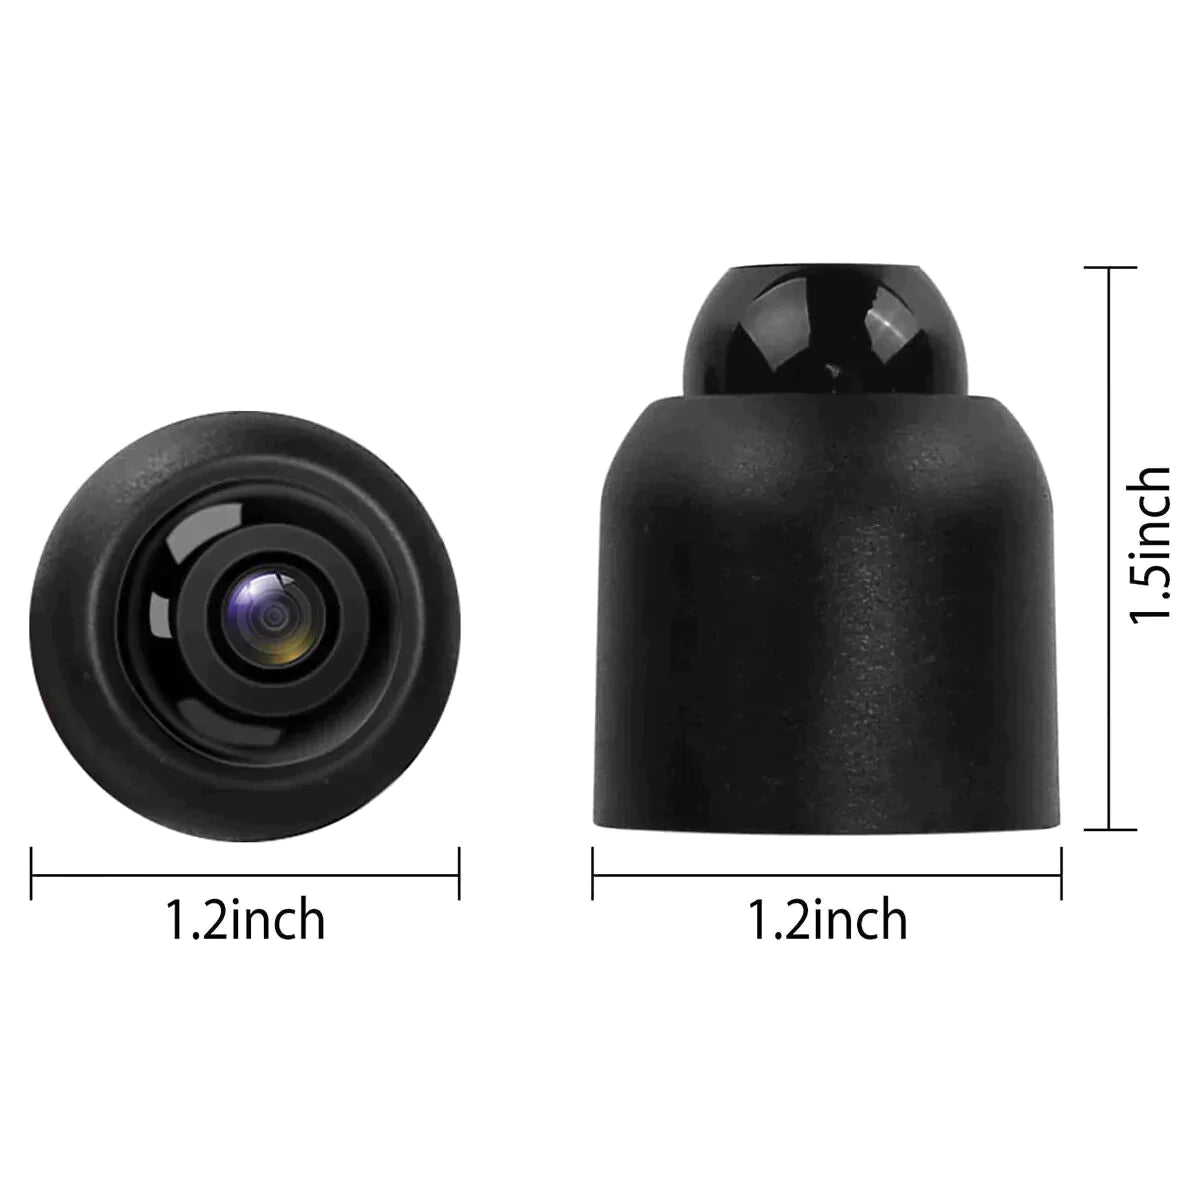 Small WiFi Security Camera Night Vision IP Security Surveillance Cam